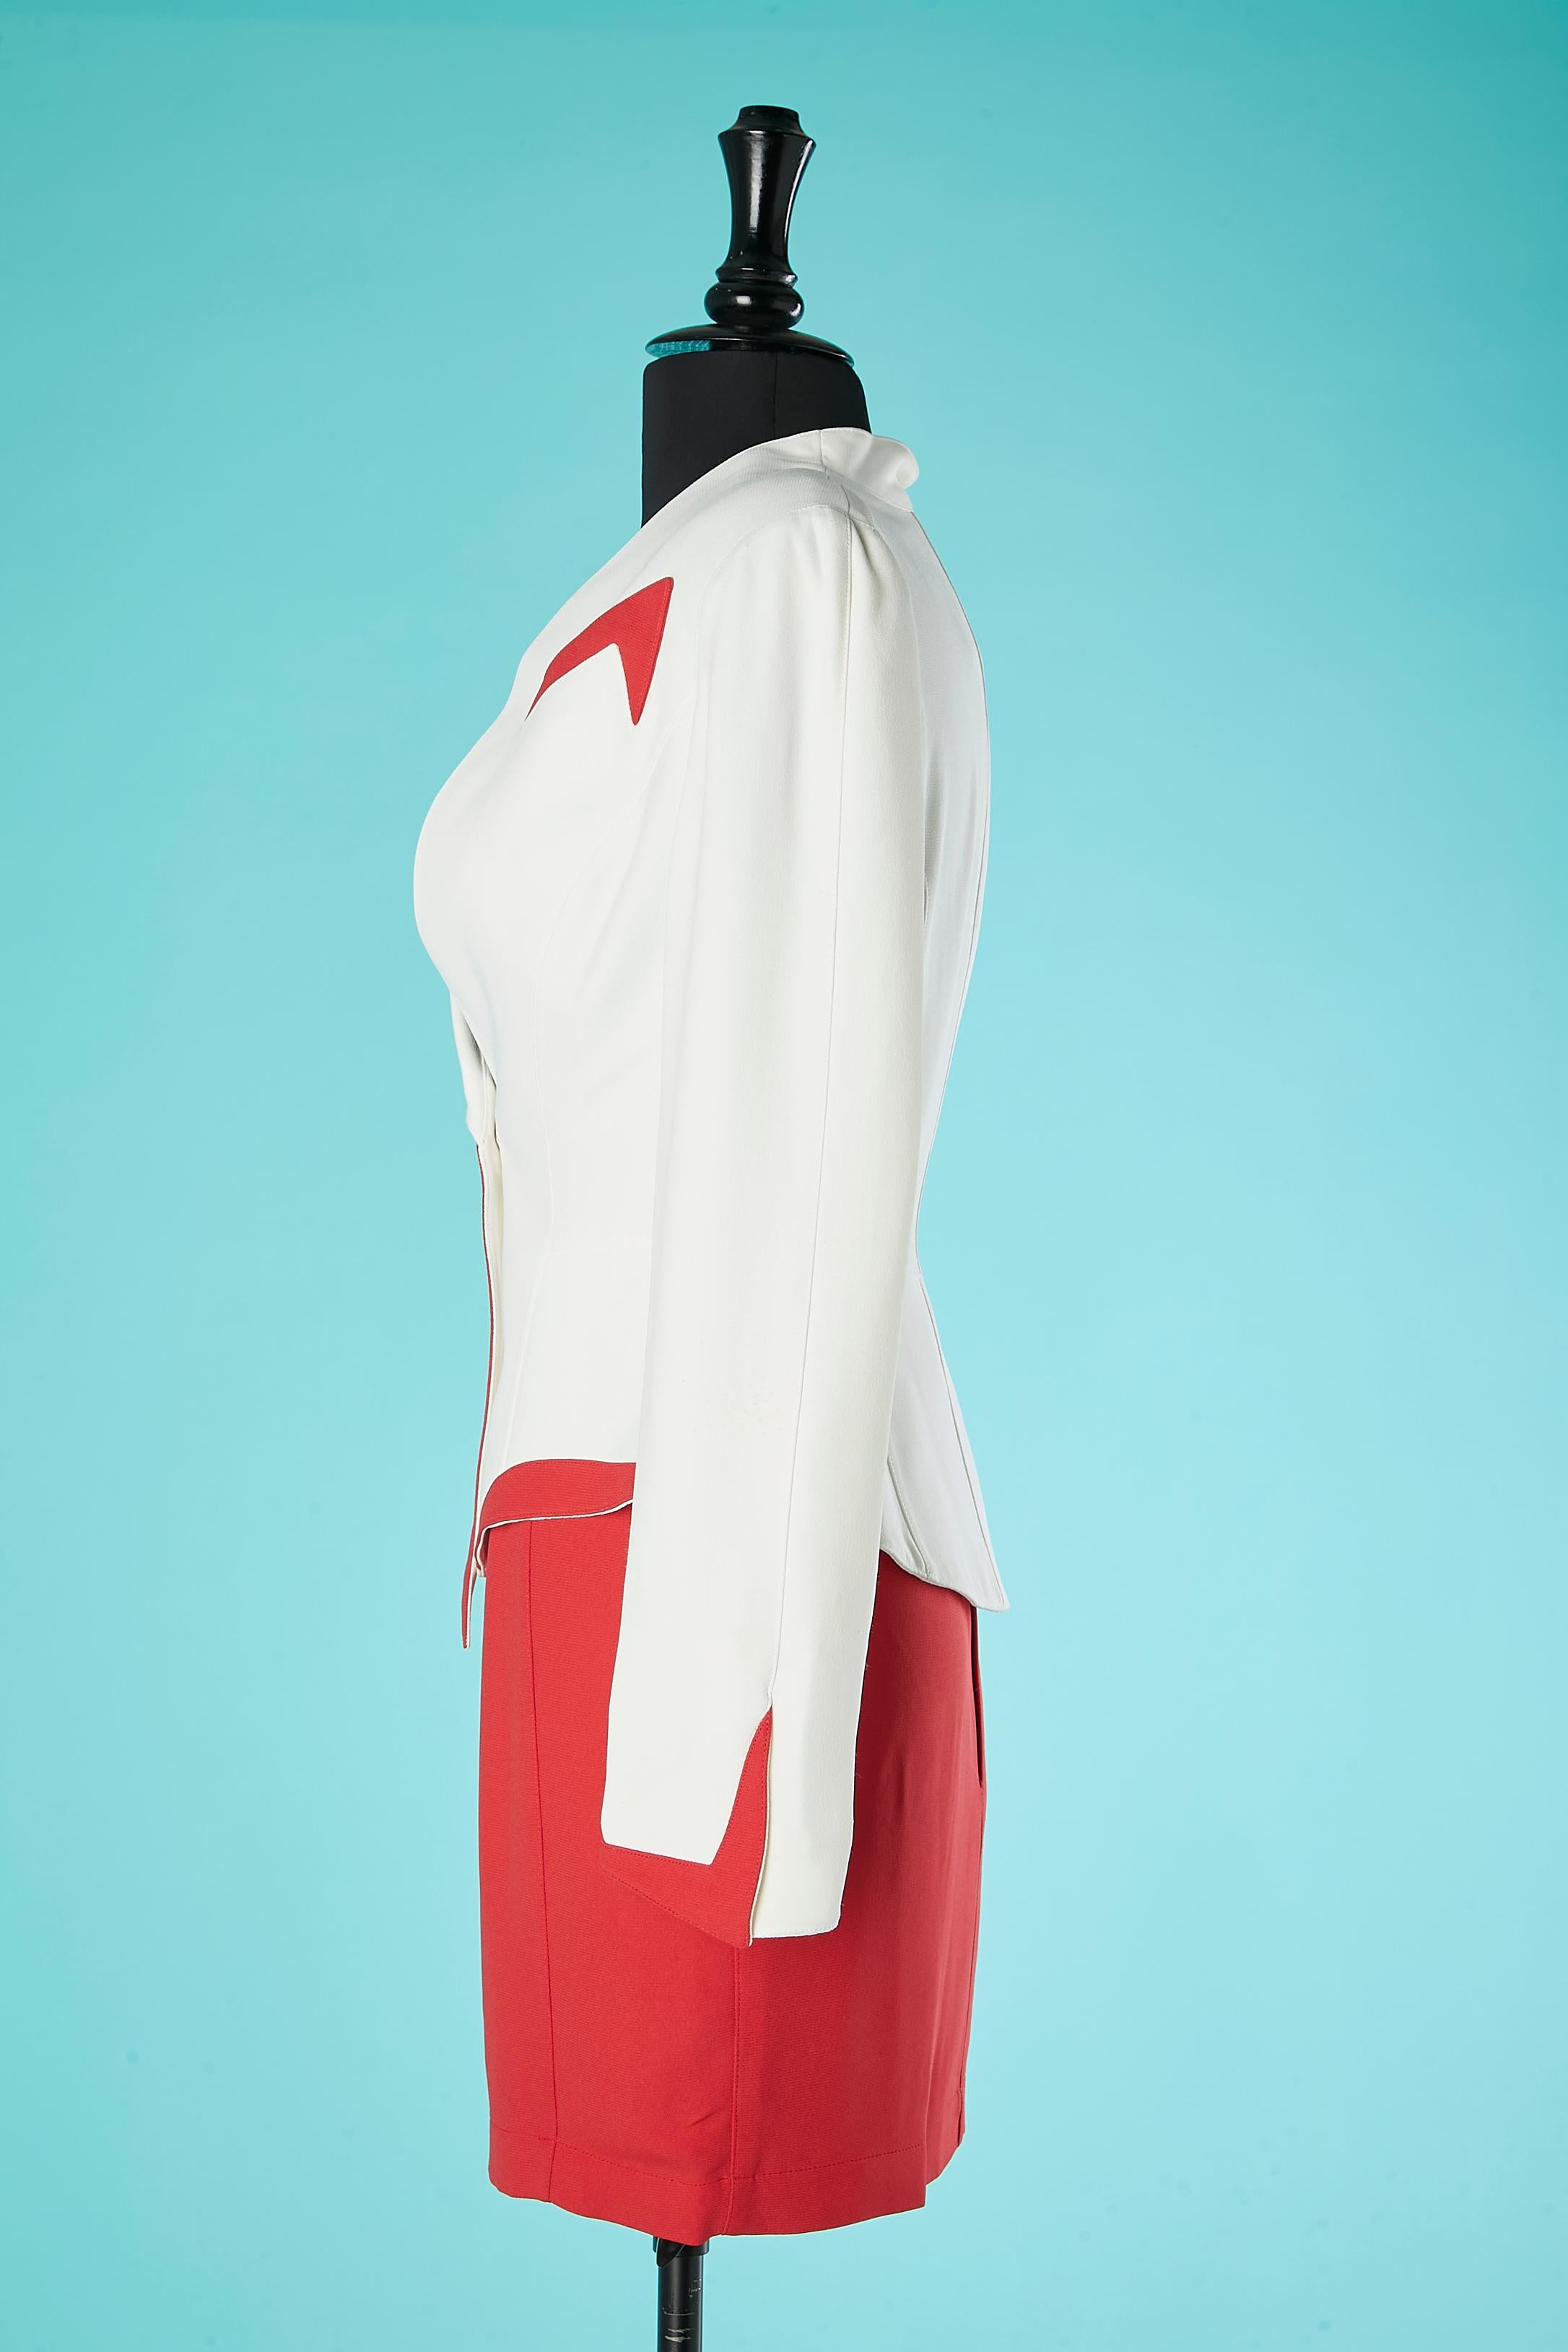 Asymmetrical ivory skirt-suit with red details and red skirt Thierry Mugler  For Sale 1